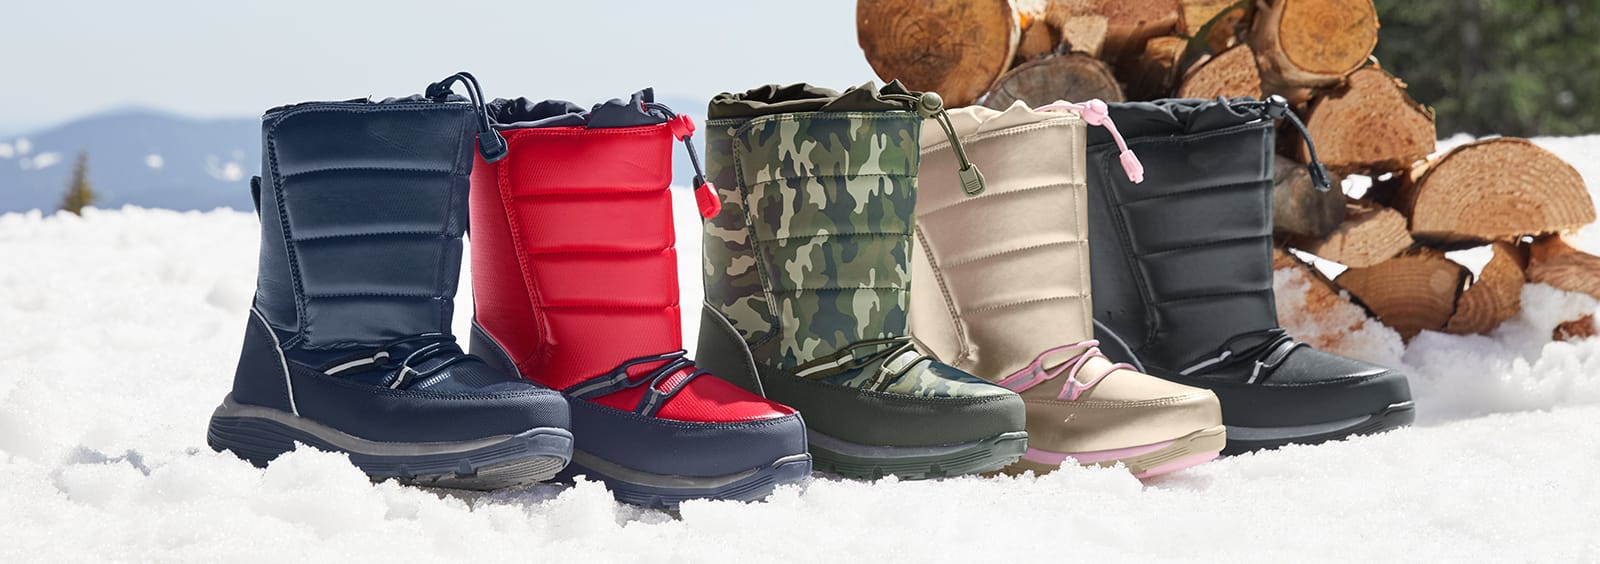 Best Snow Boots to Keep Your Kids' Feet Warm and Cozy